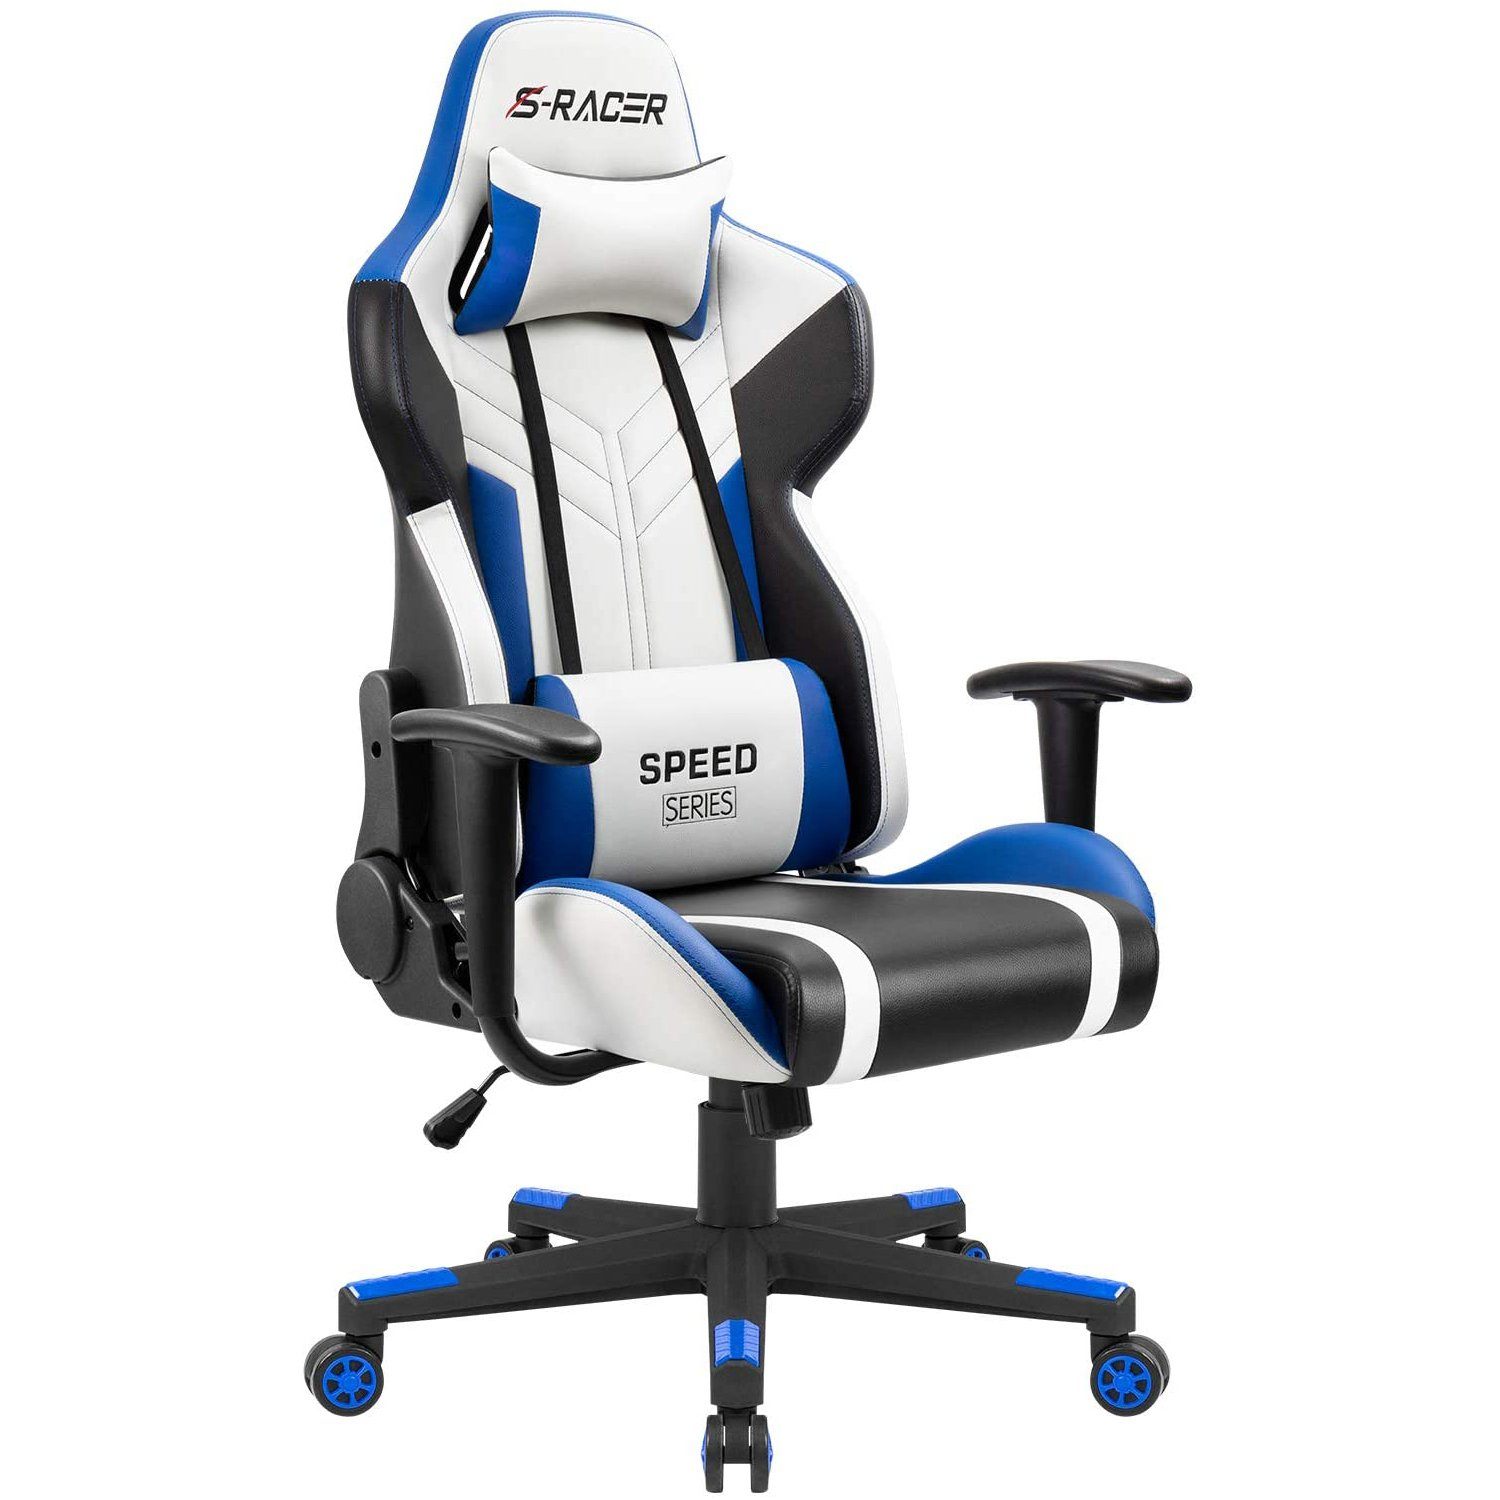 Homall Gaming Chair Sracer Chair Ergonomic High Back Computer Office Chair PU Leather Racing Chair PC Adjustable Swivel Task Chair - image 1 of 7